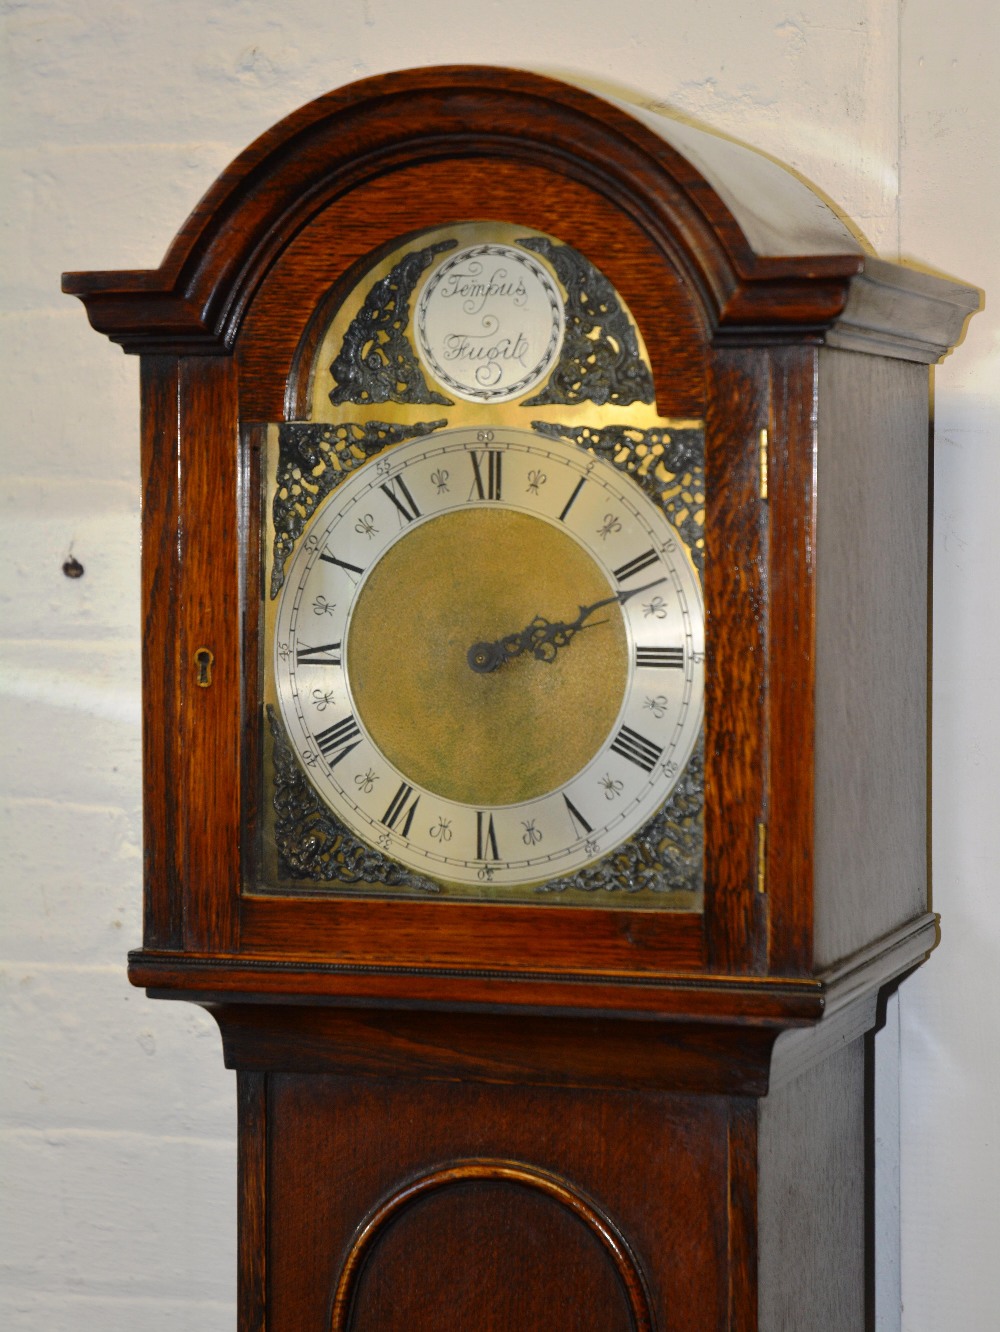 A Tempus Fugit grand mantle clock arched cornice brass face, applied chapter ring and Roman